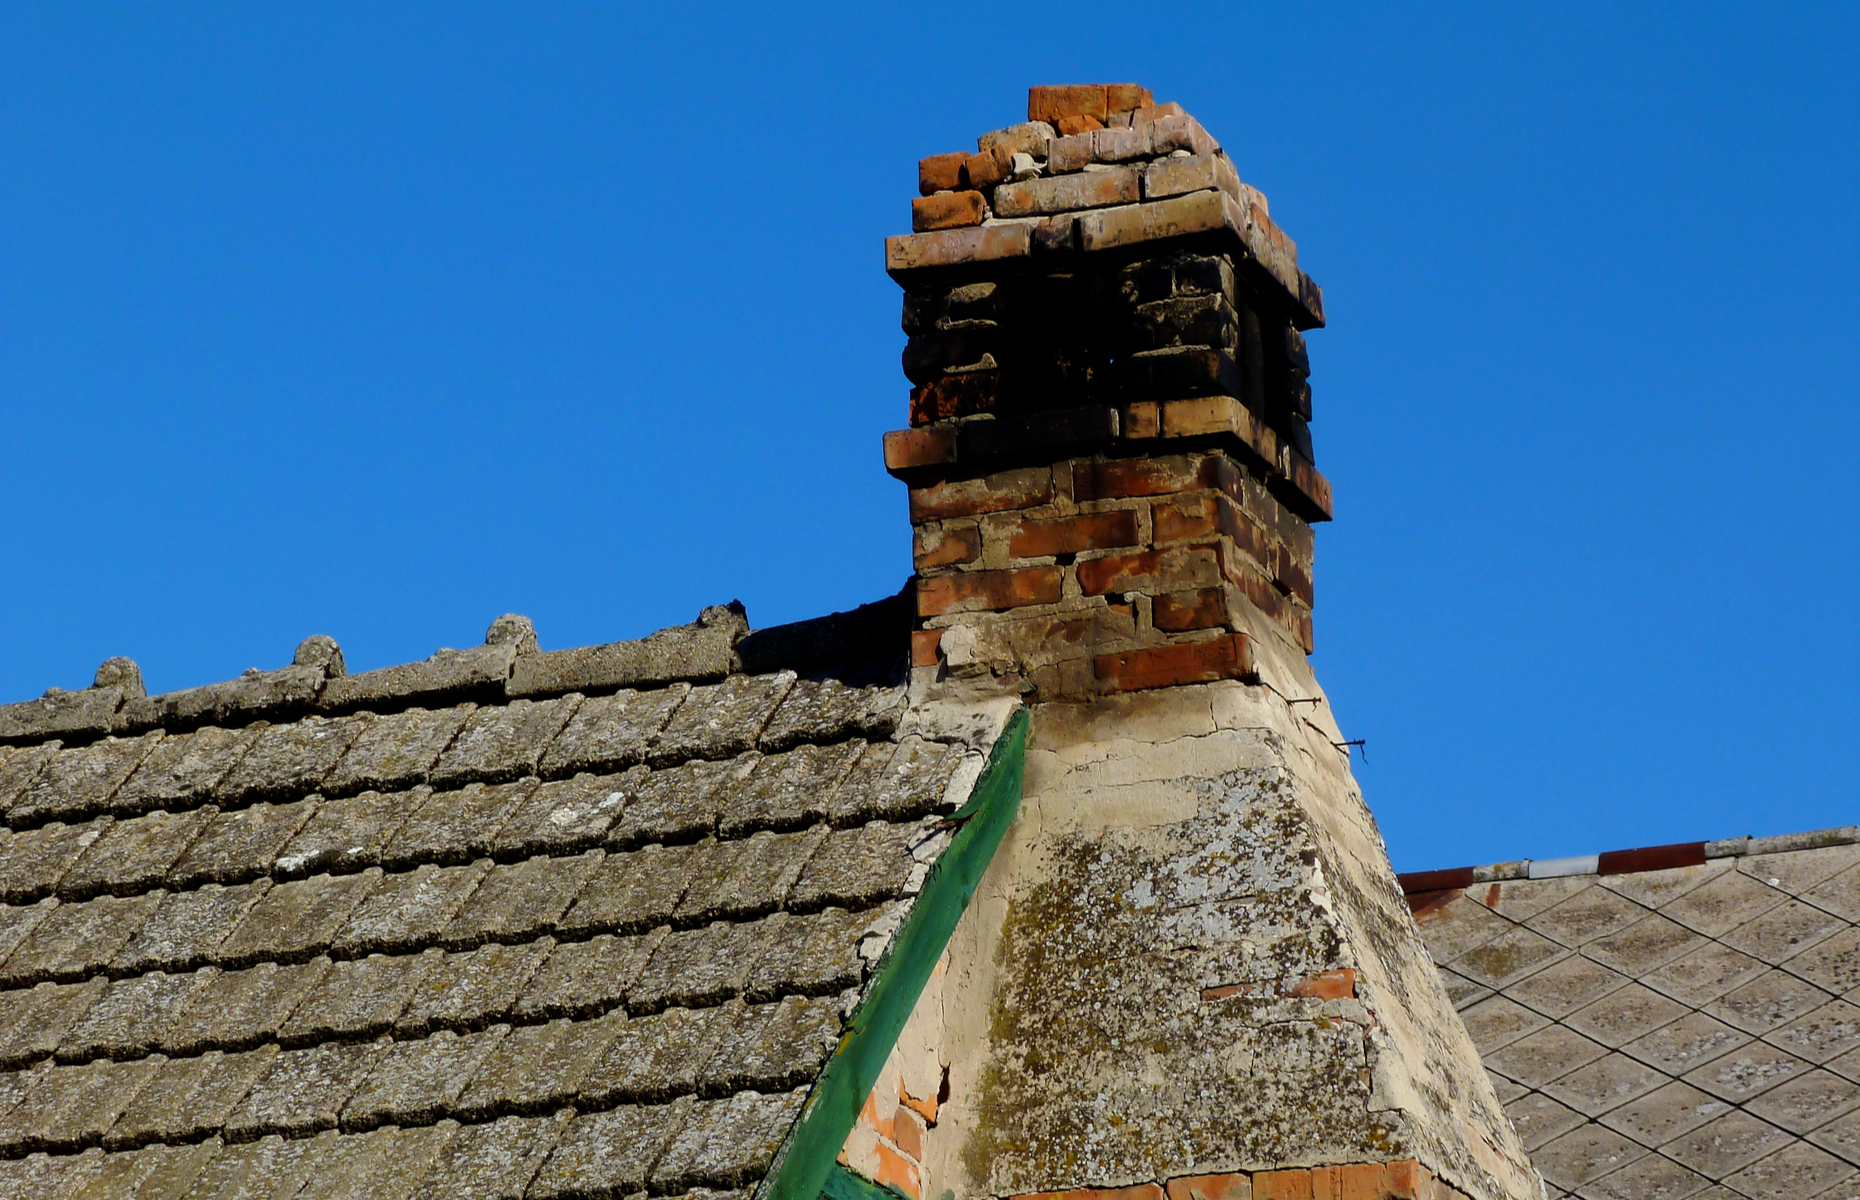 Many old chimneys aren't lined, which can lead to toxic gases seeping into homes. Image: Istvan Balogh/Shutterstock